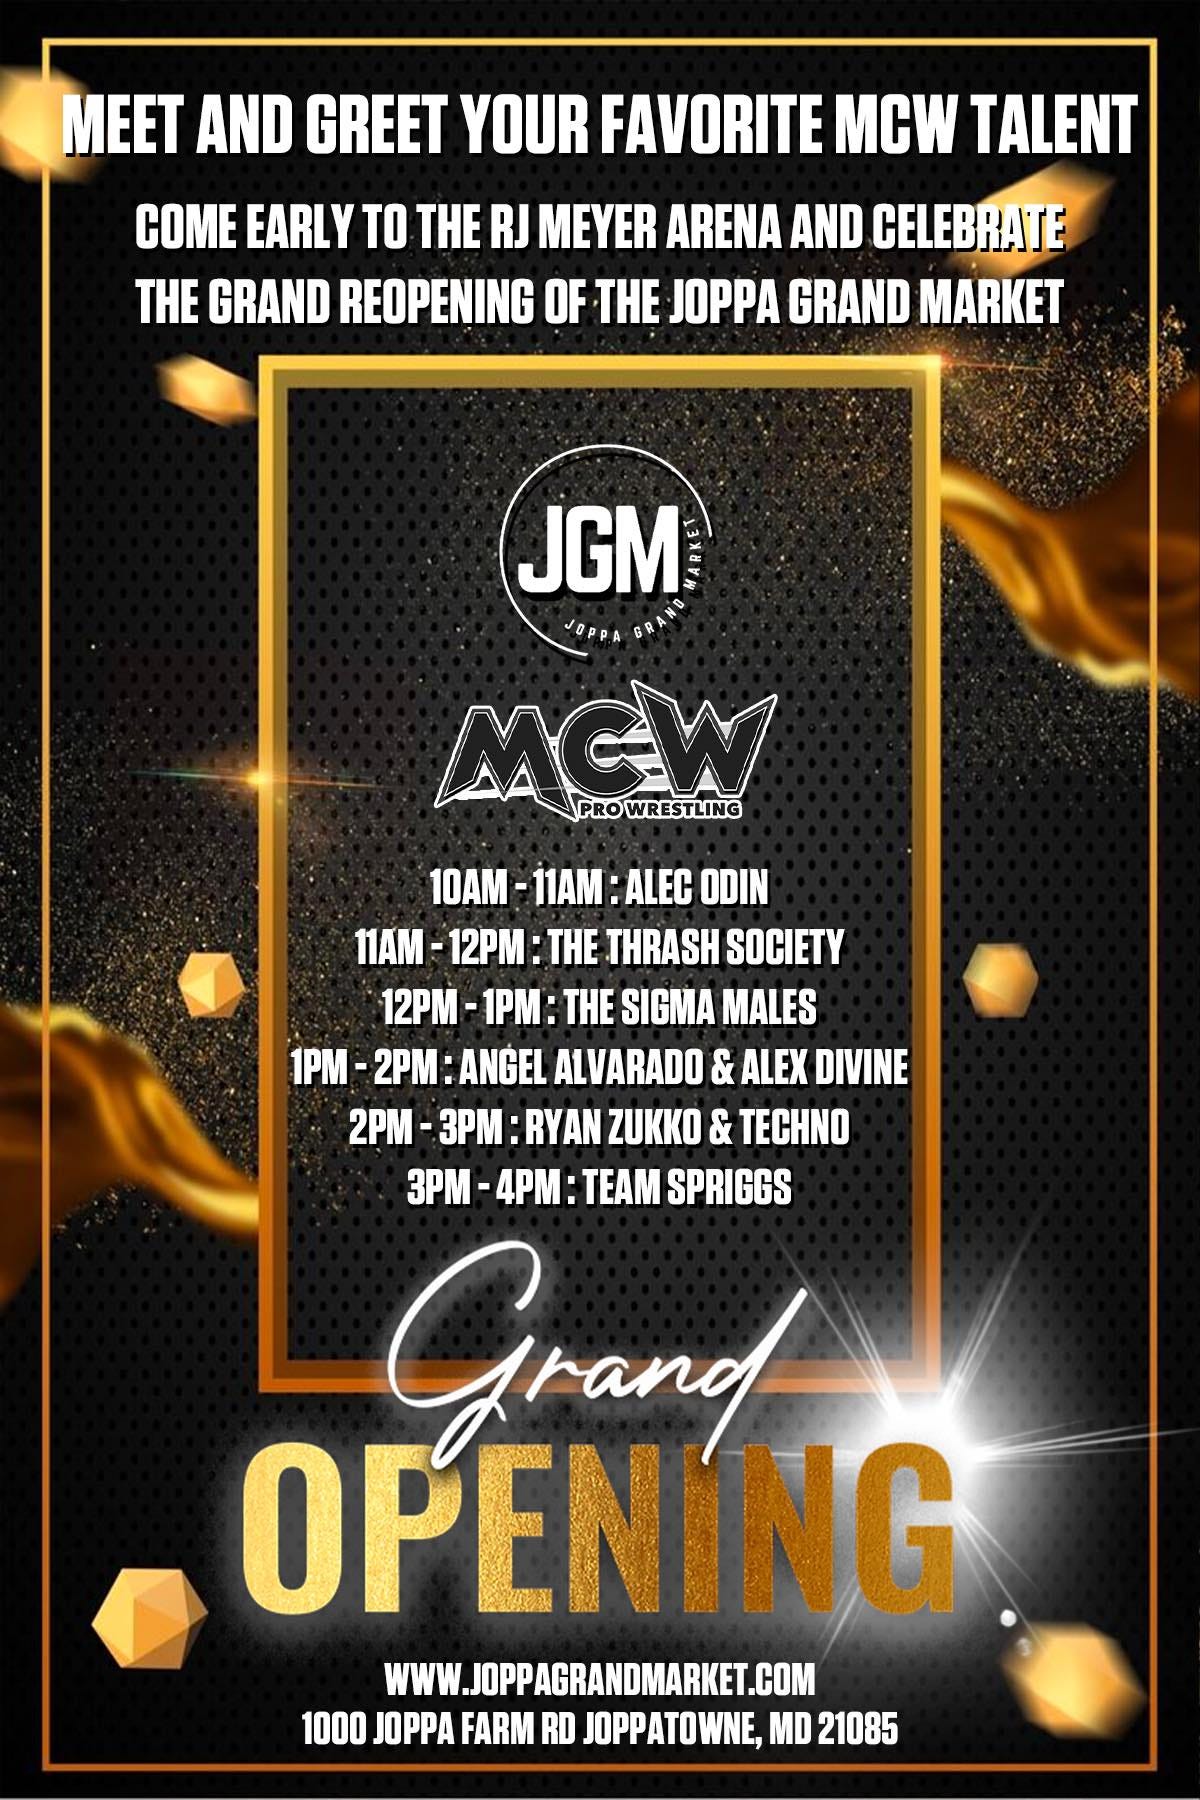 May be an image of text that says 'MEET AND GREET YOUR FAVORITE MCW TALENT COME EARLY TO THE RJ MEYER ARENA AND CELEBRATE THE GRAND REOPENING OF THE JOPPA GRAND MARKET JGM JOPPA6 MCW PRWRESTLING 10AM 11AM ALEC ODIN 11AM 12PM: THE THRASH SOCIETY 12PM THE SIGMA MALES 1PM 2PM: ANGEL ALVARADO & ALEX DIVINE 2PM RYAN ZUKKO & TECHNO 3PM- TEAM SPRIGGS Grand OPENÍNG WWW.InPPAGRANDMARKET.COM 1000 JOPPA FARM RD. OPPATOWNE, MD 21085'